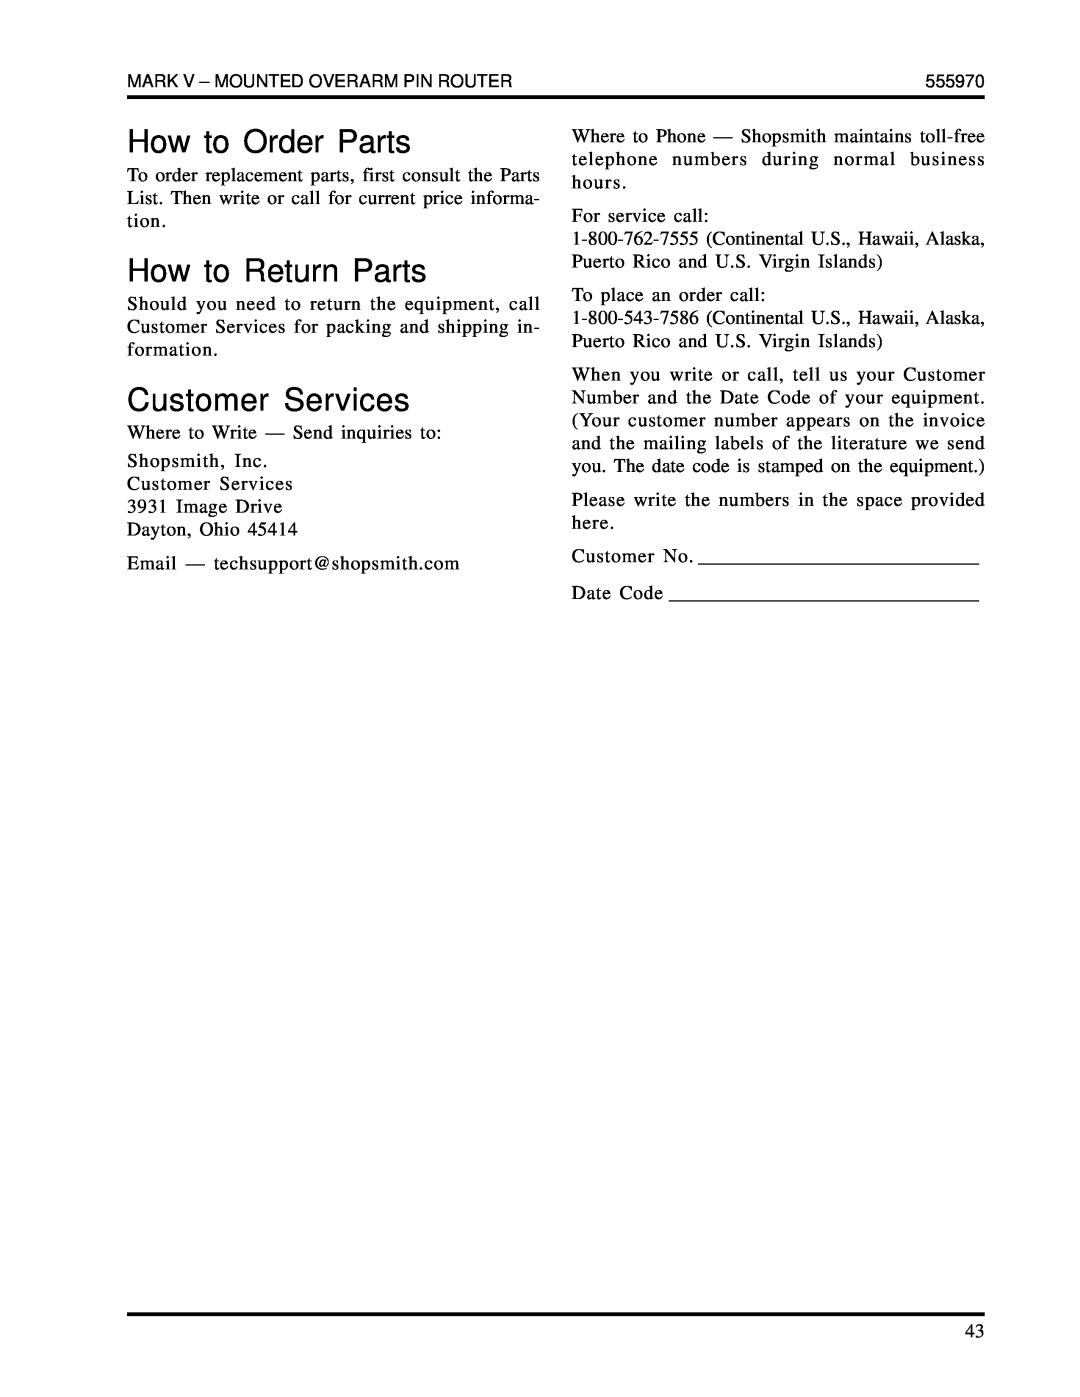 Shopsmith 555970 manual How to Order Parts, How to Return Parts, Customer Services 